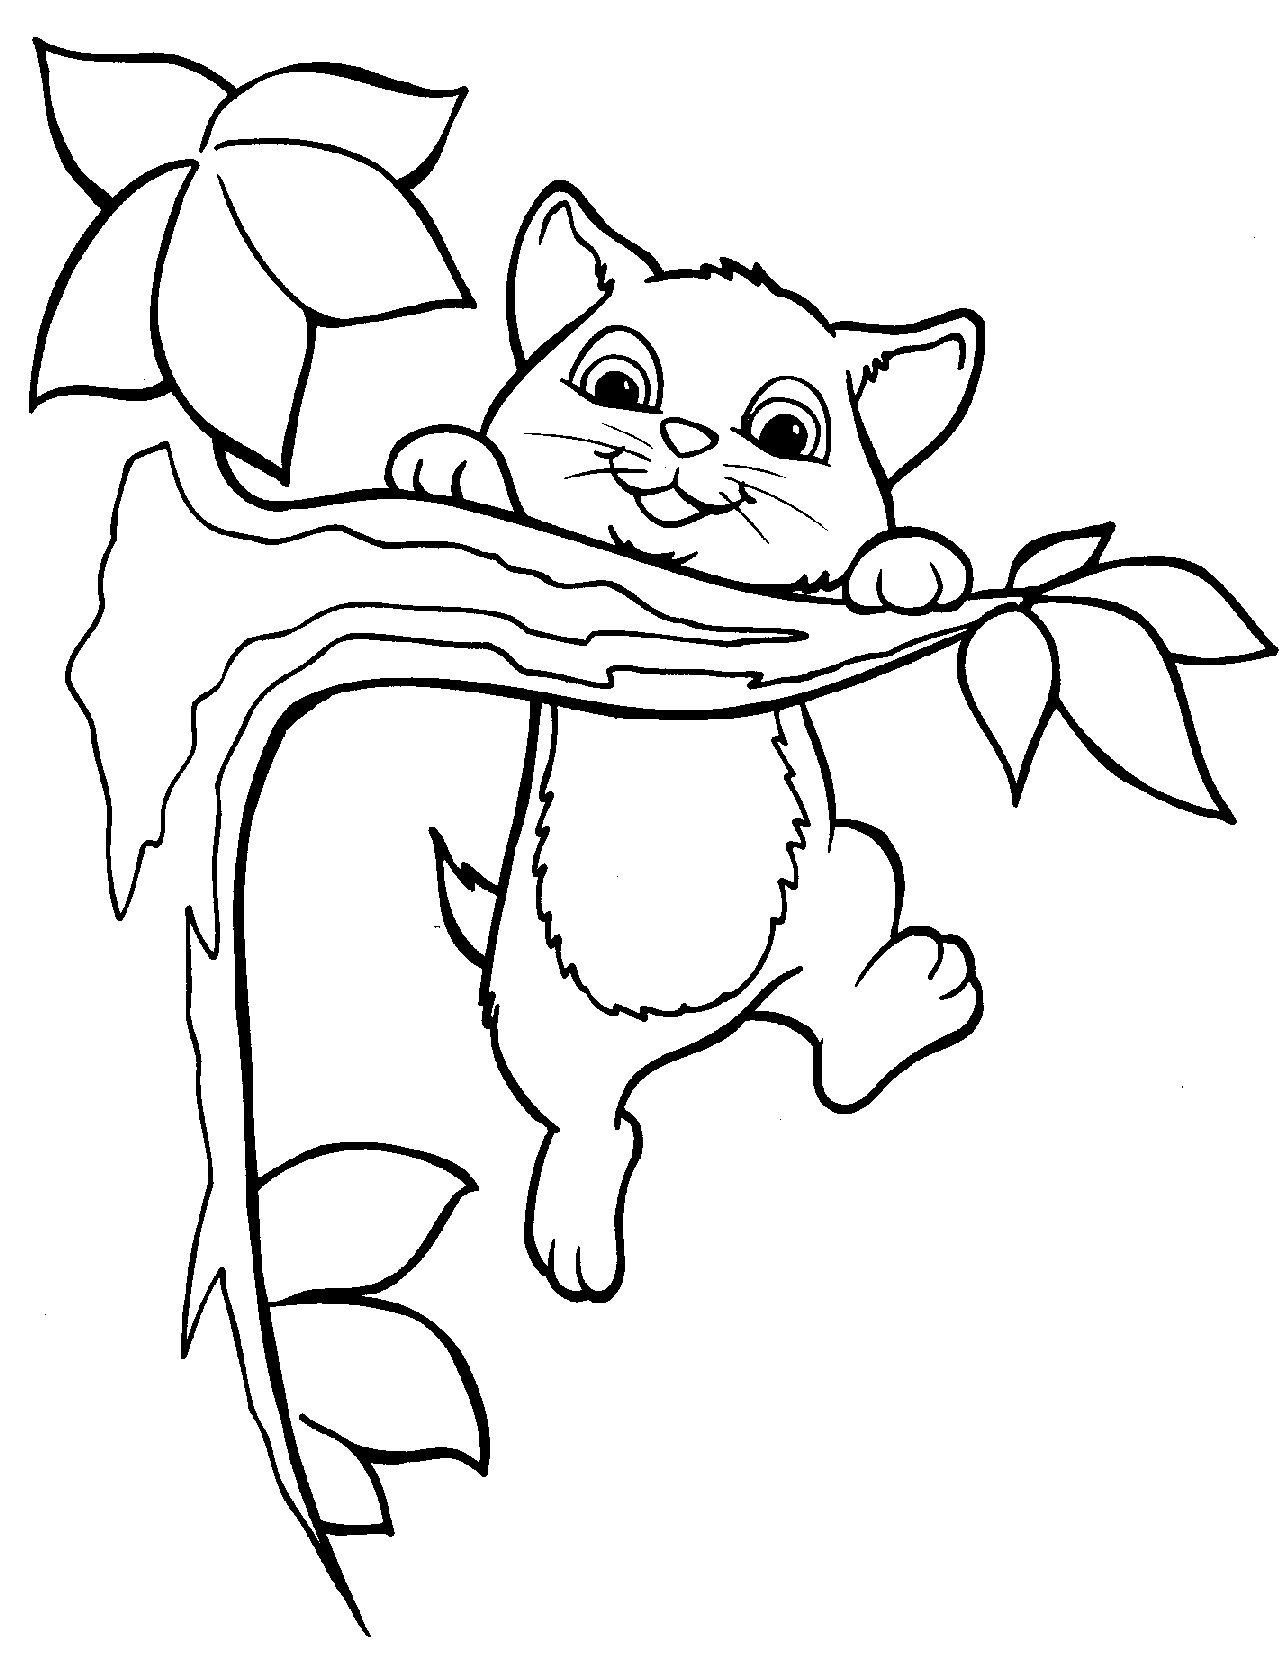 Free Printable Kitten Coloring Pages For Kids   Best Coloring Pages For ...